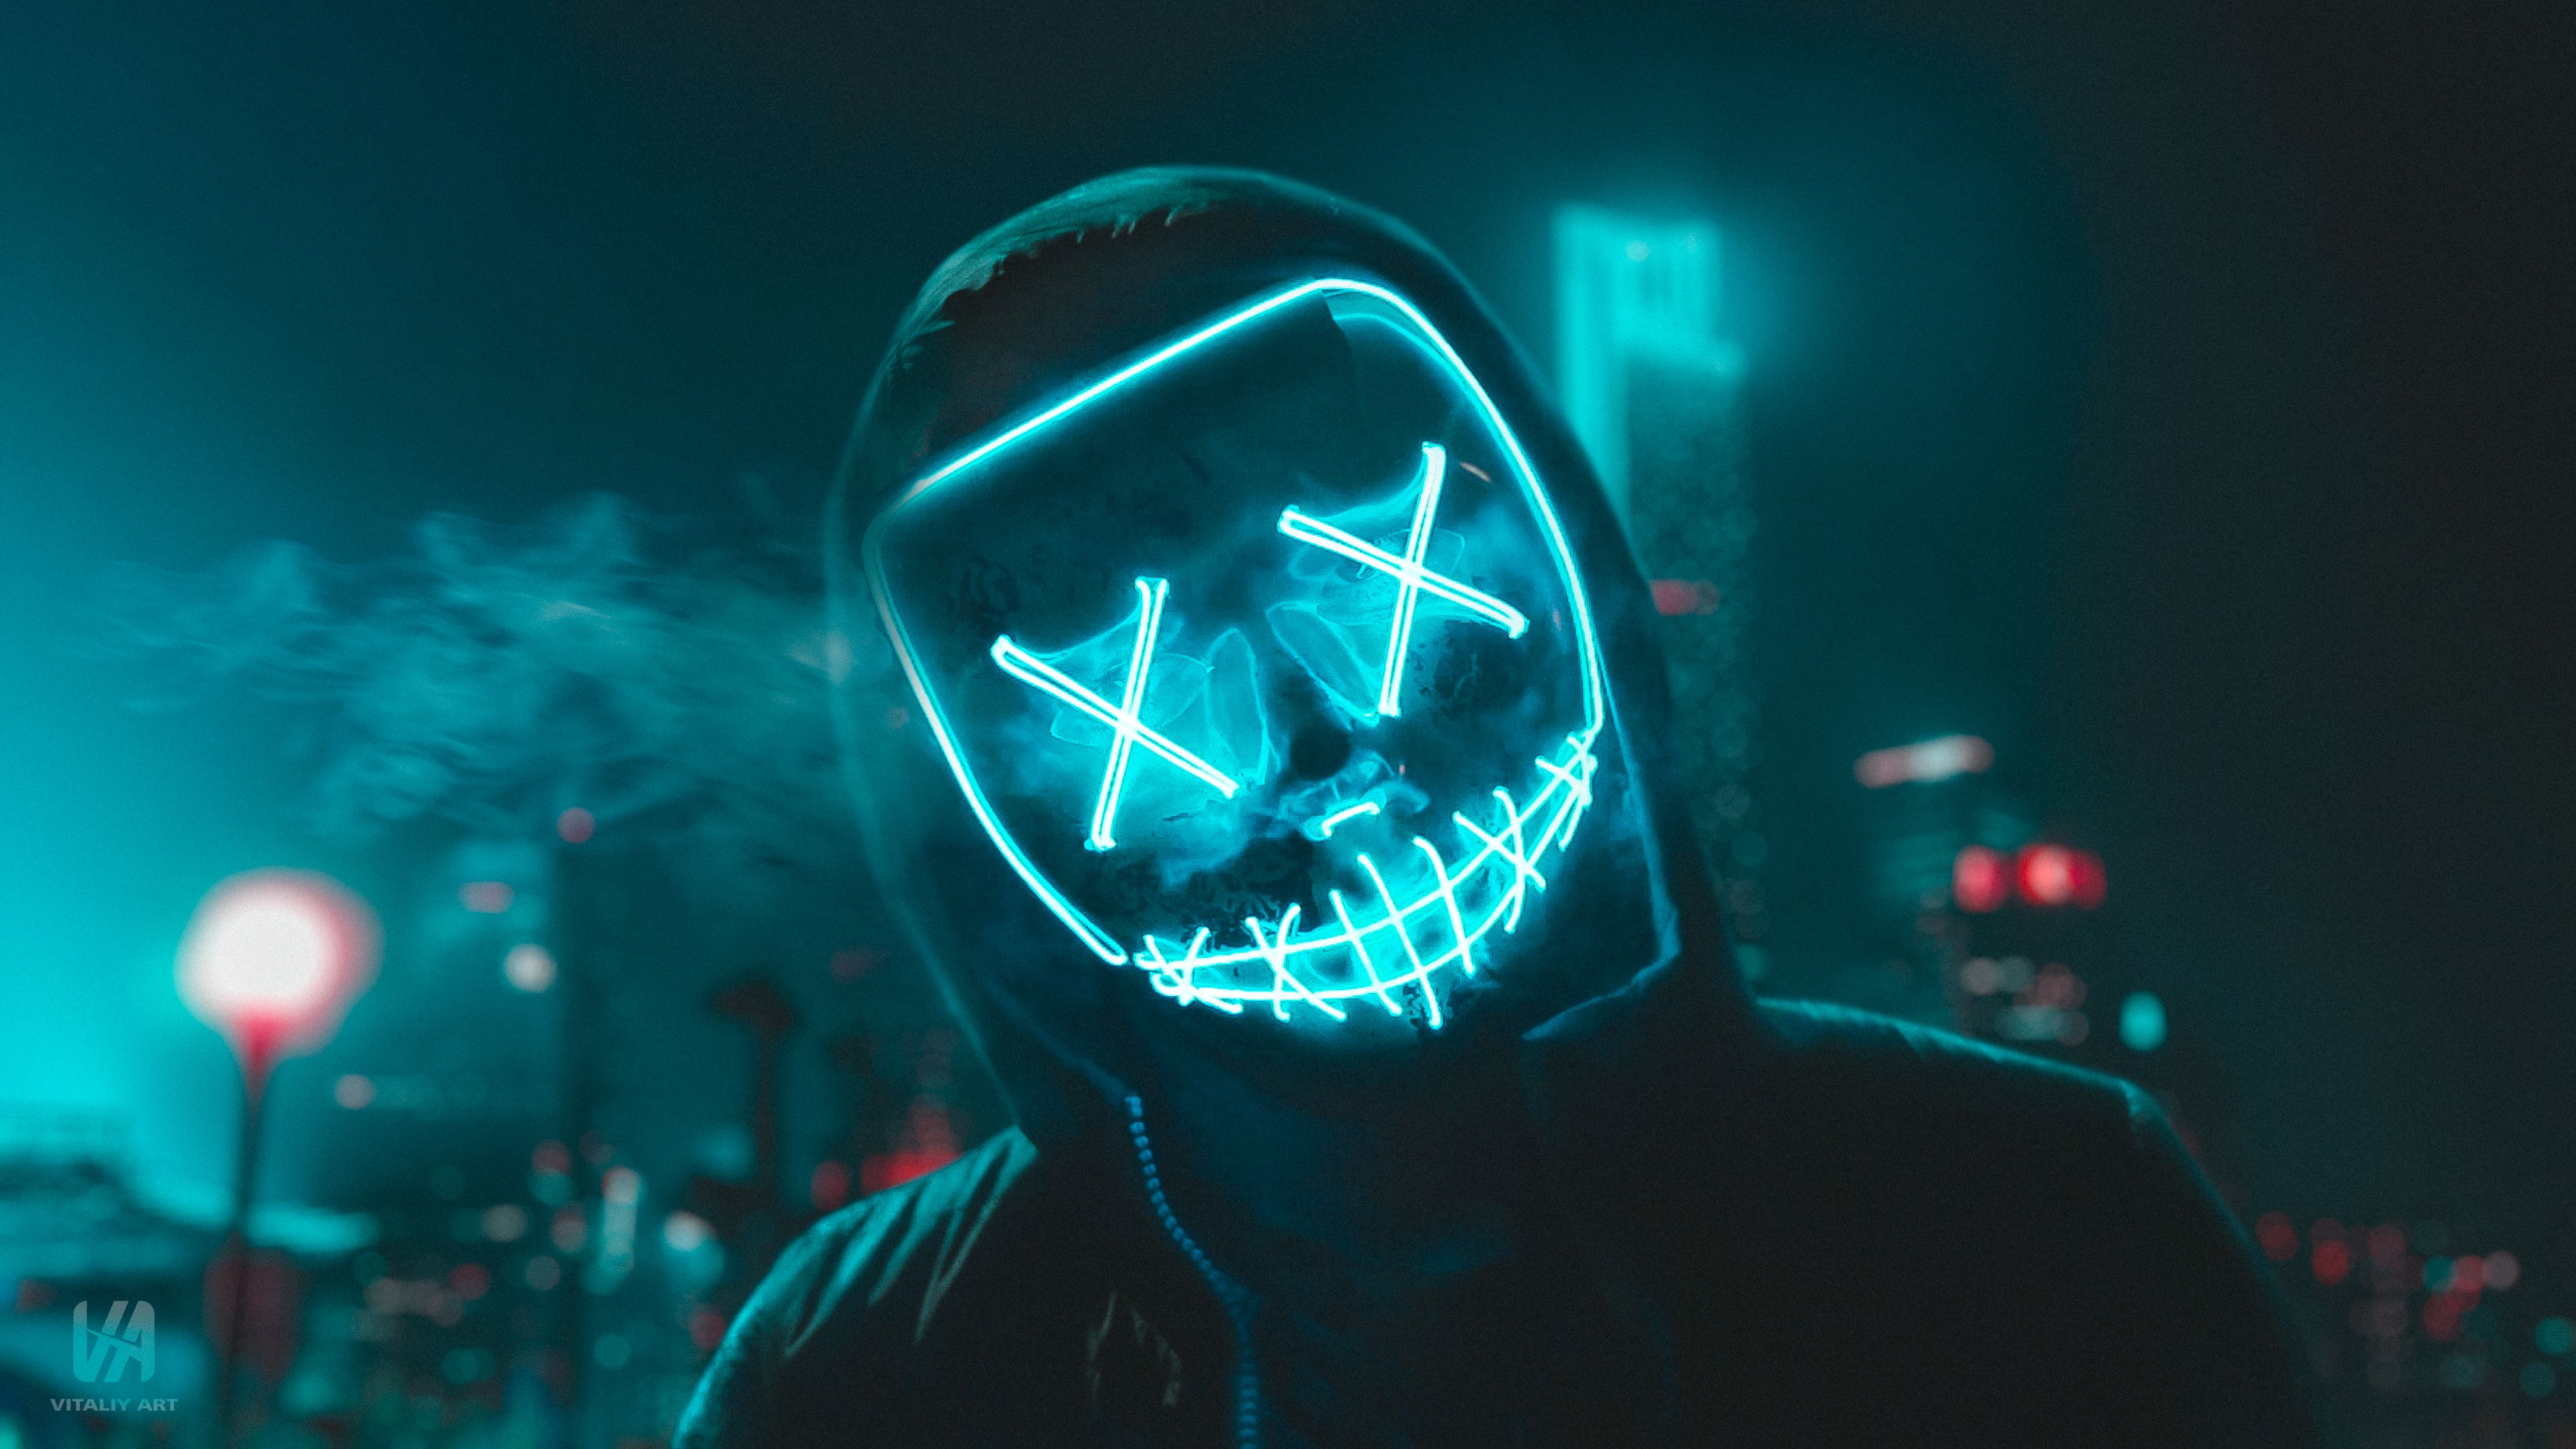 The Purge Wallpapers